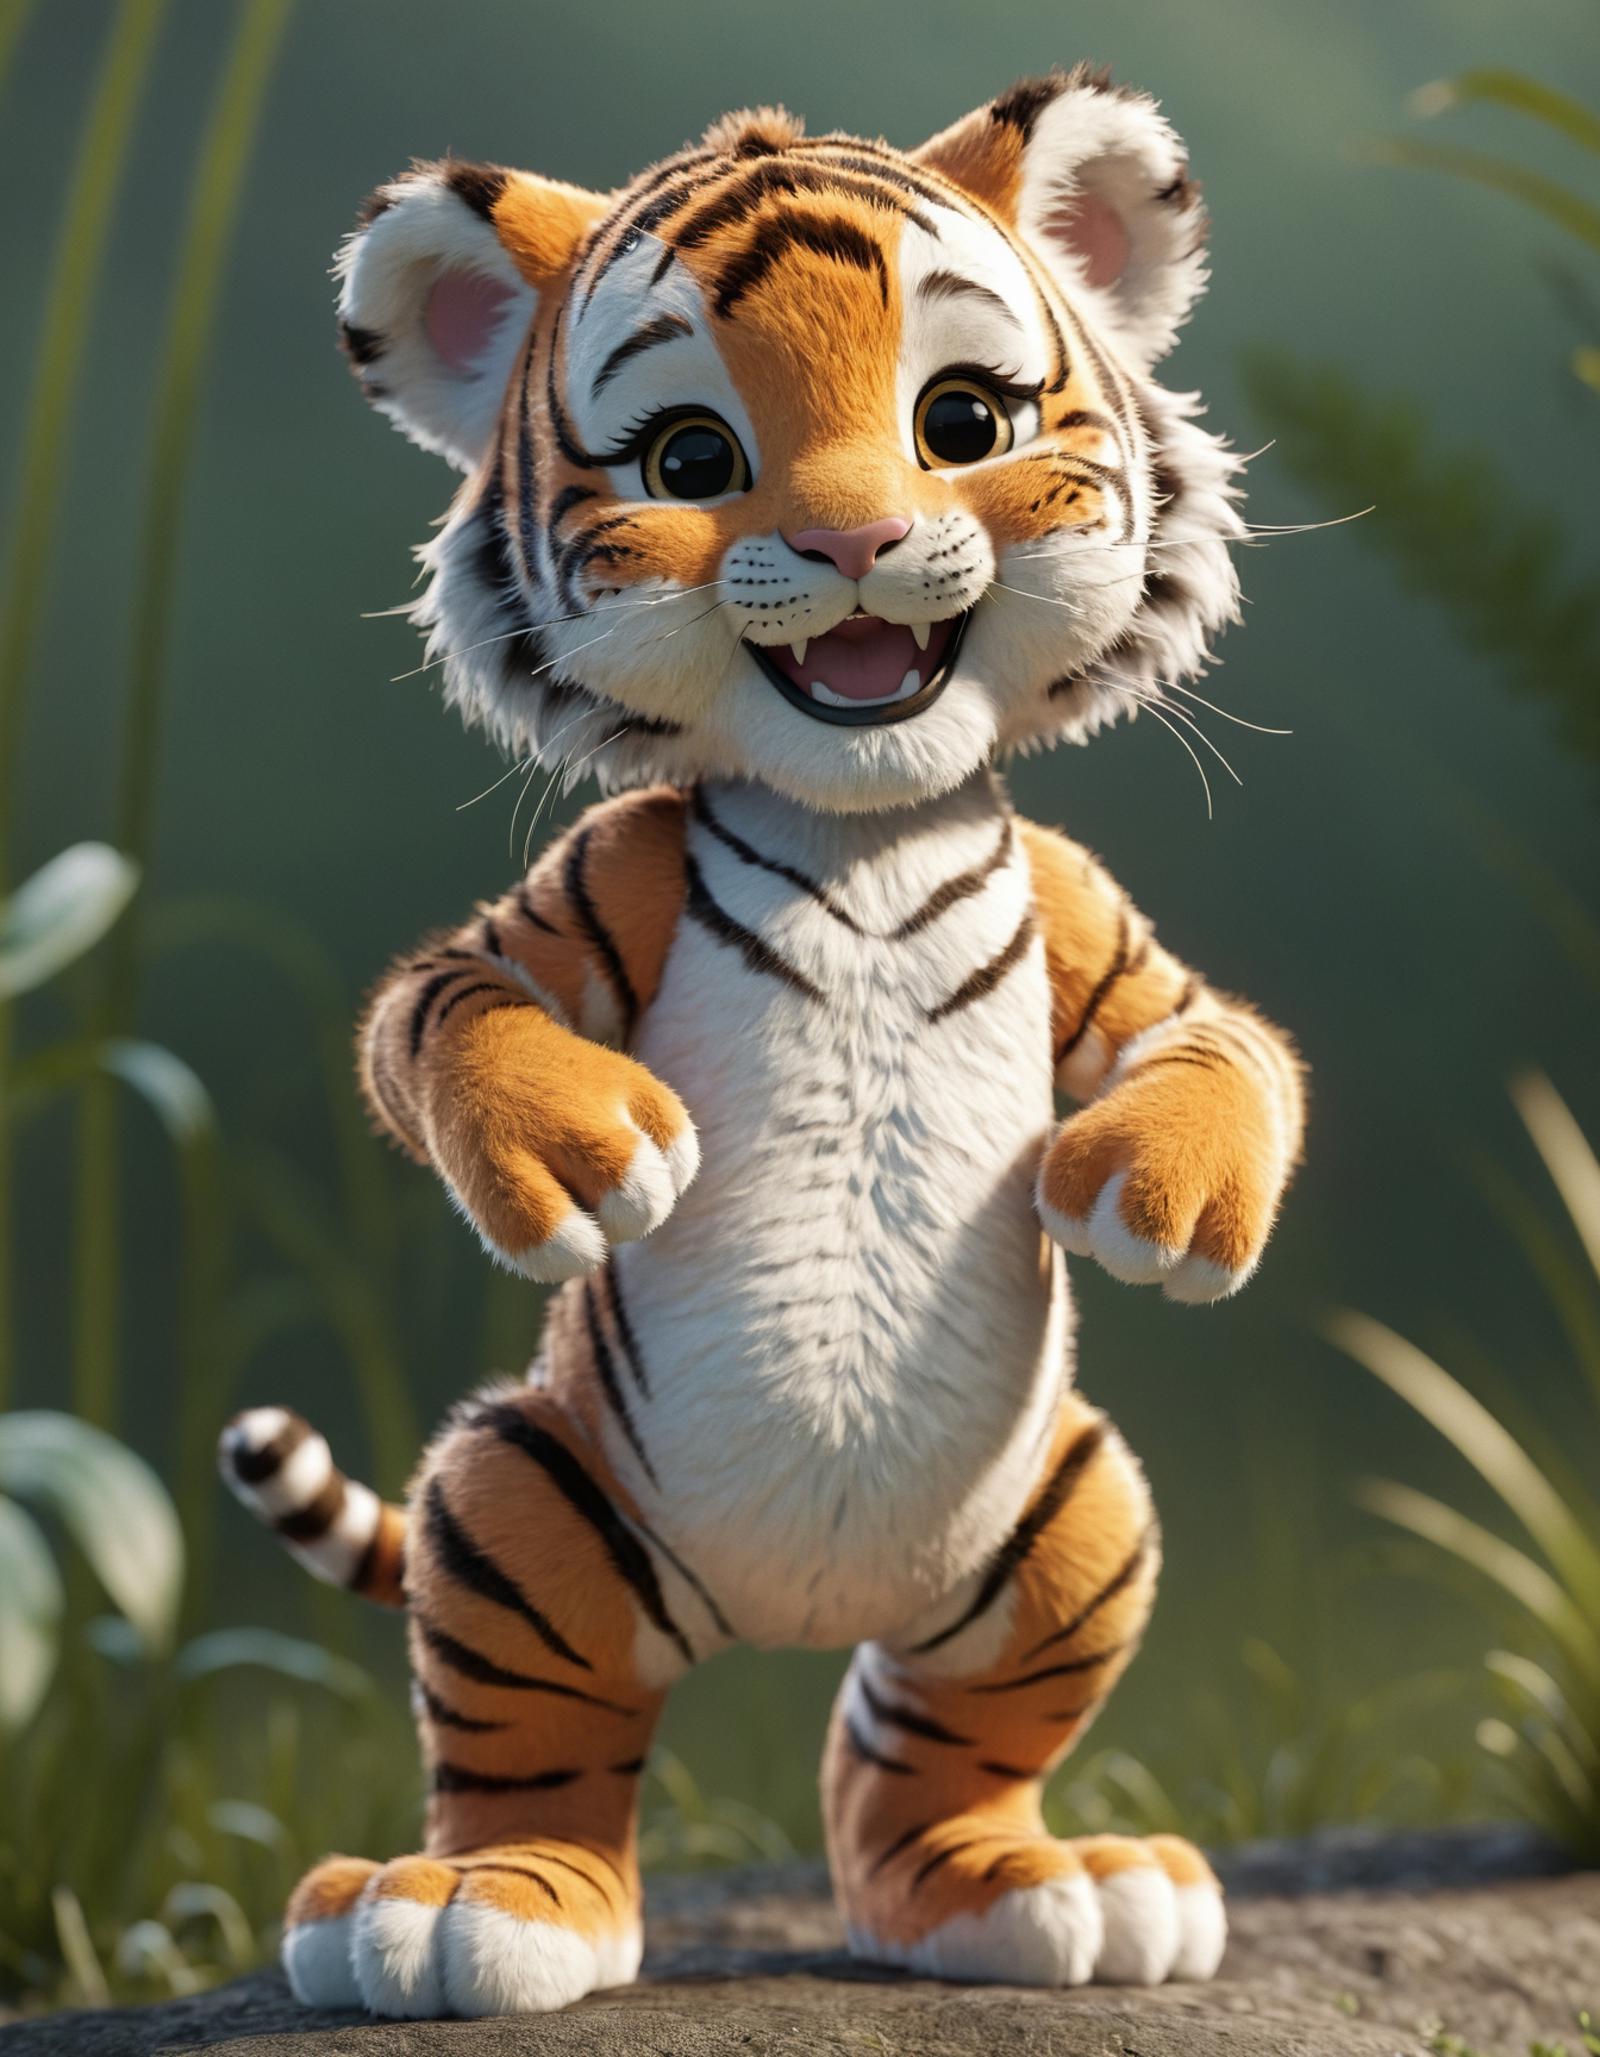 A cartoon tiger character with a wide smile and white whiskers.